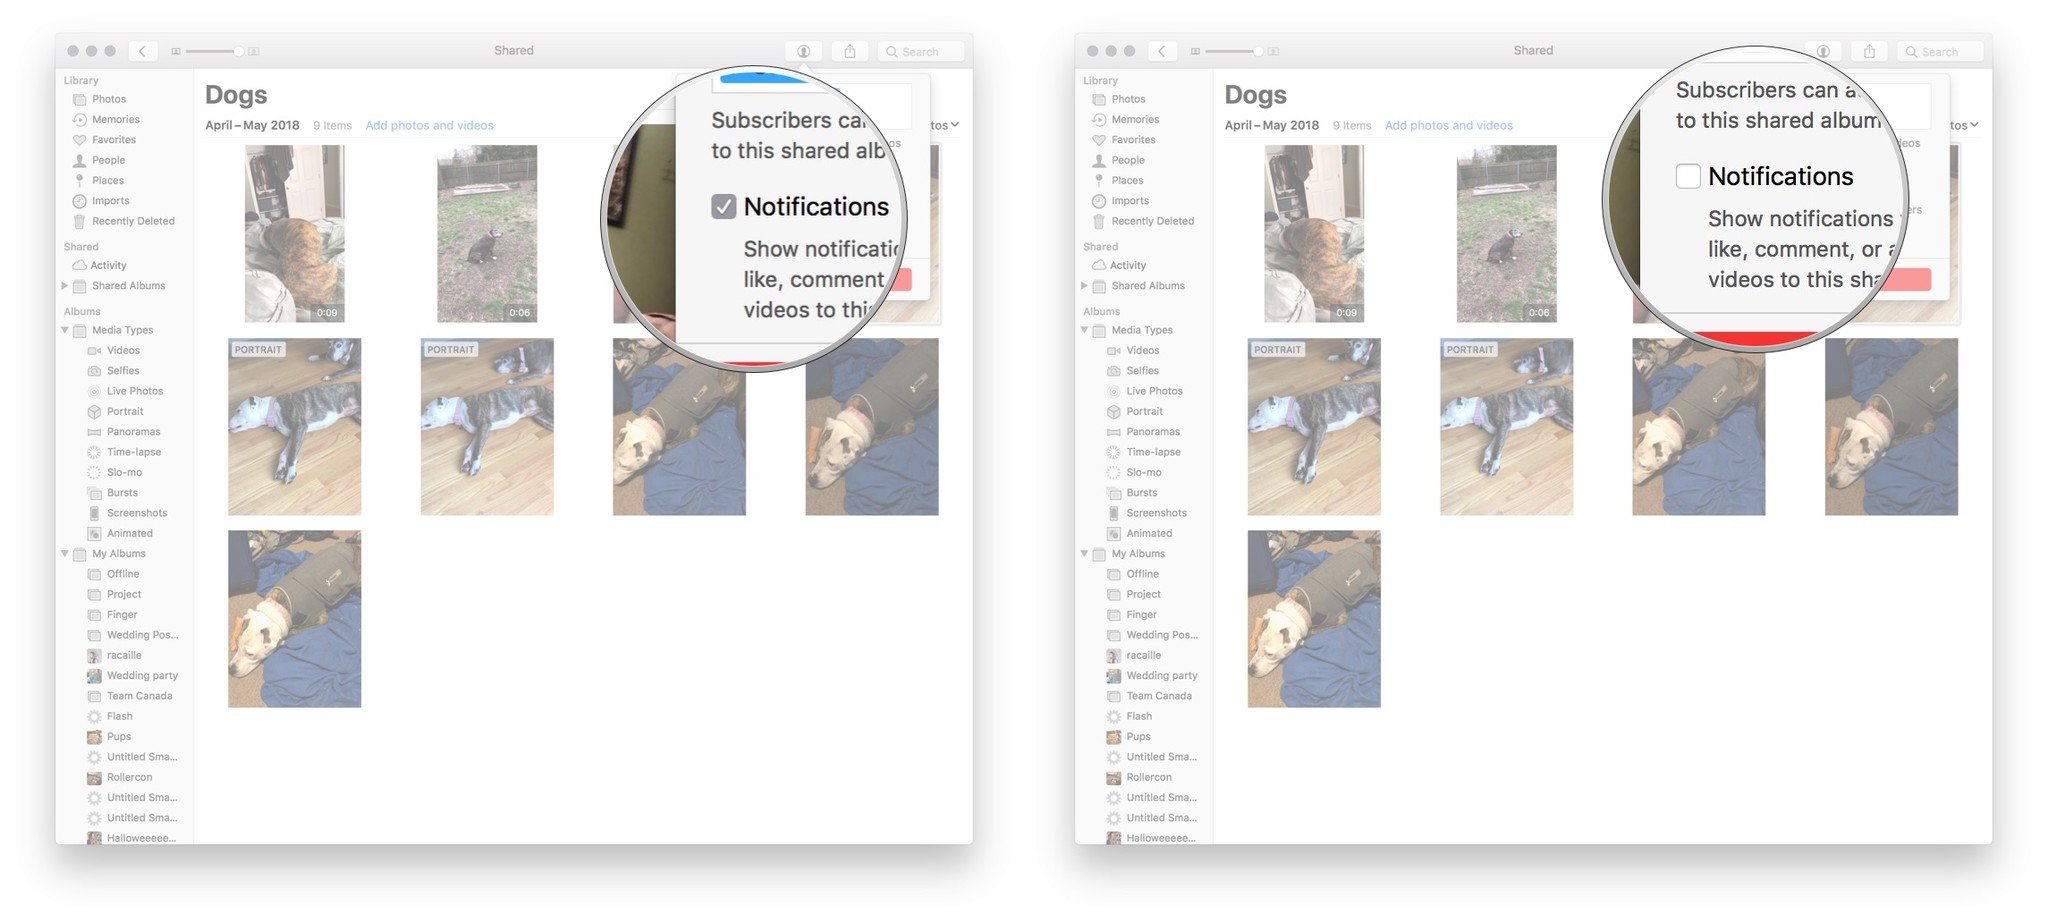 Disable notifications: Launch Photos, Open Shared Album, Click People, Uncheck Notifications